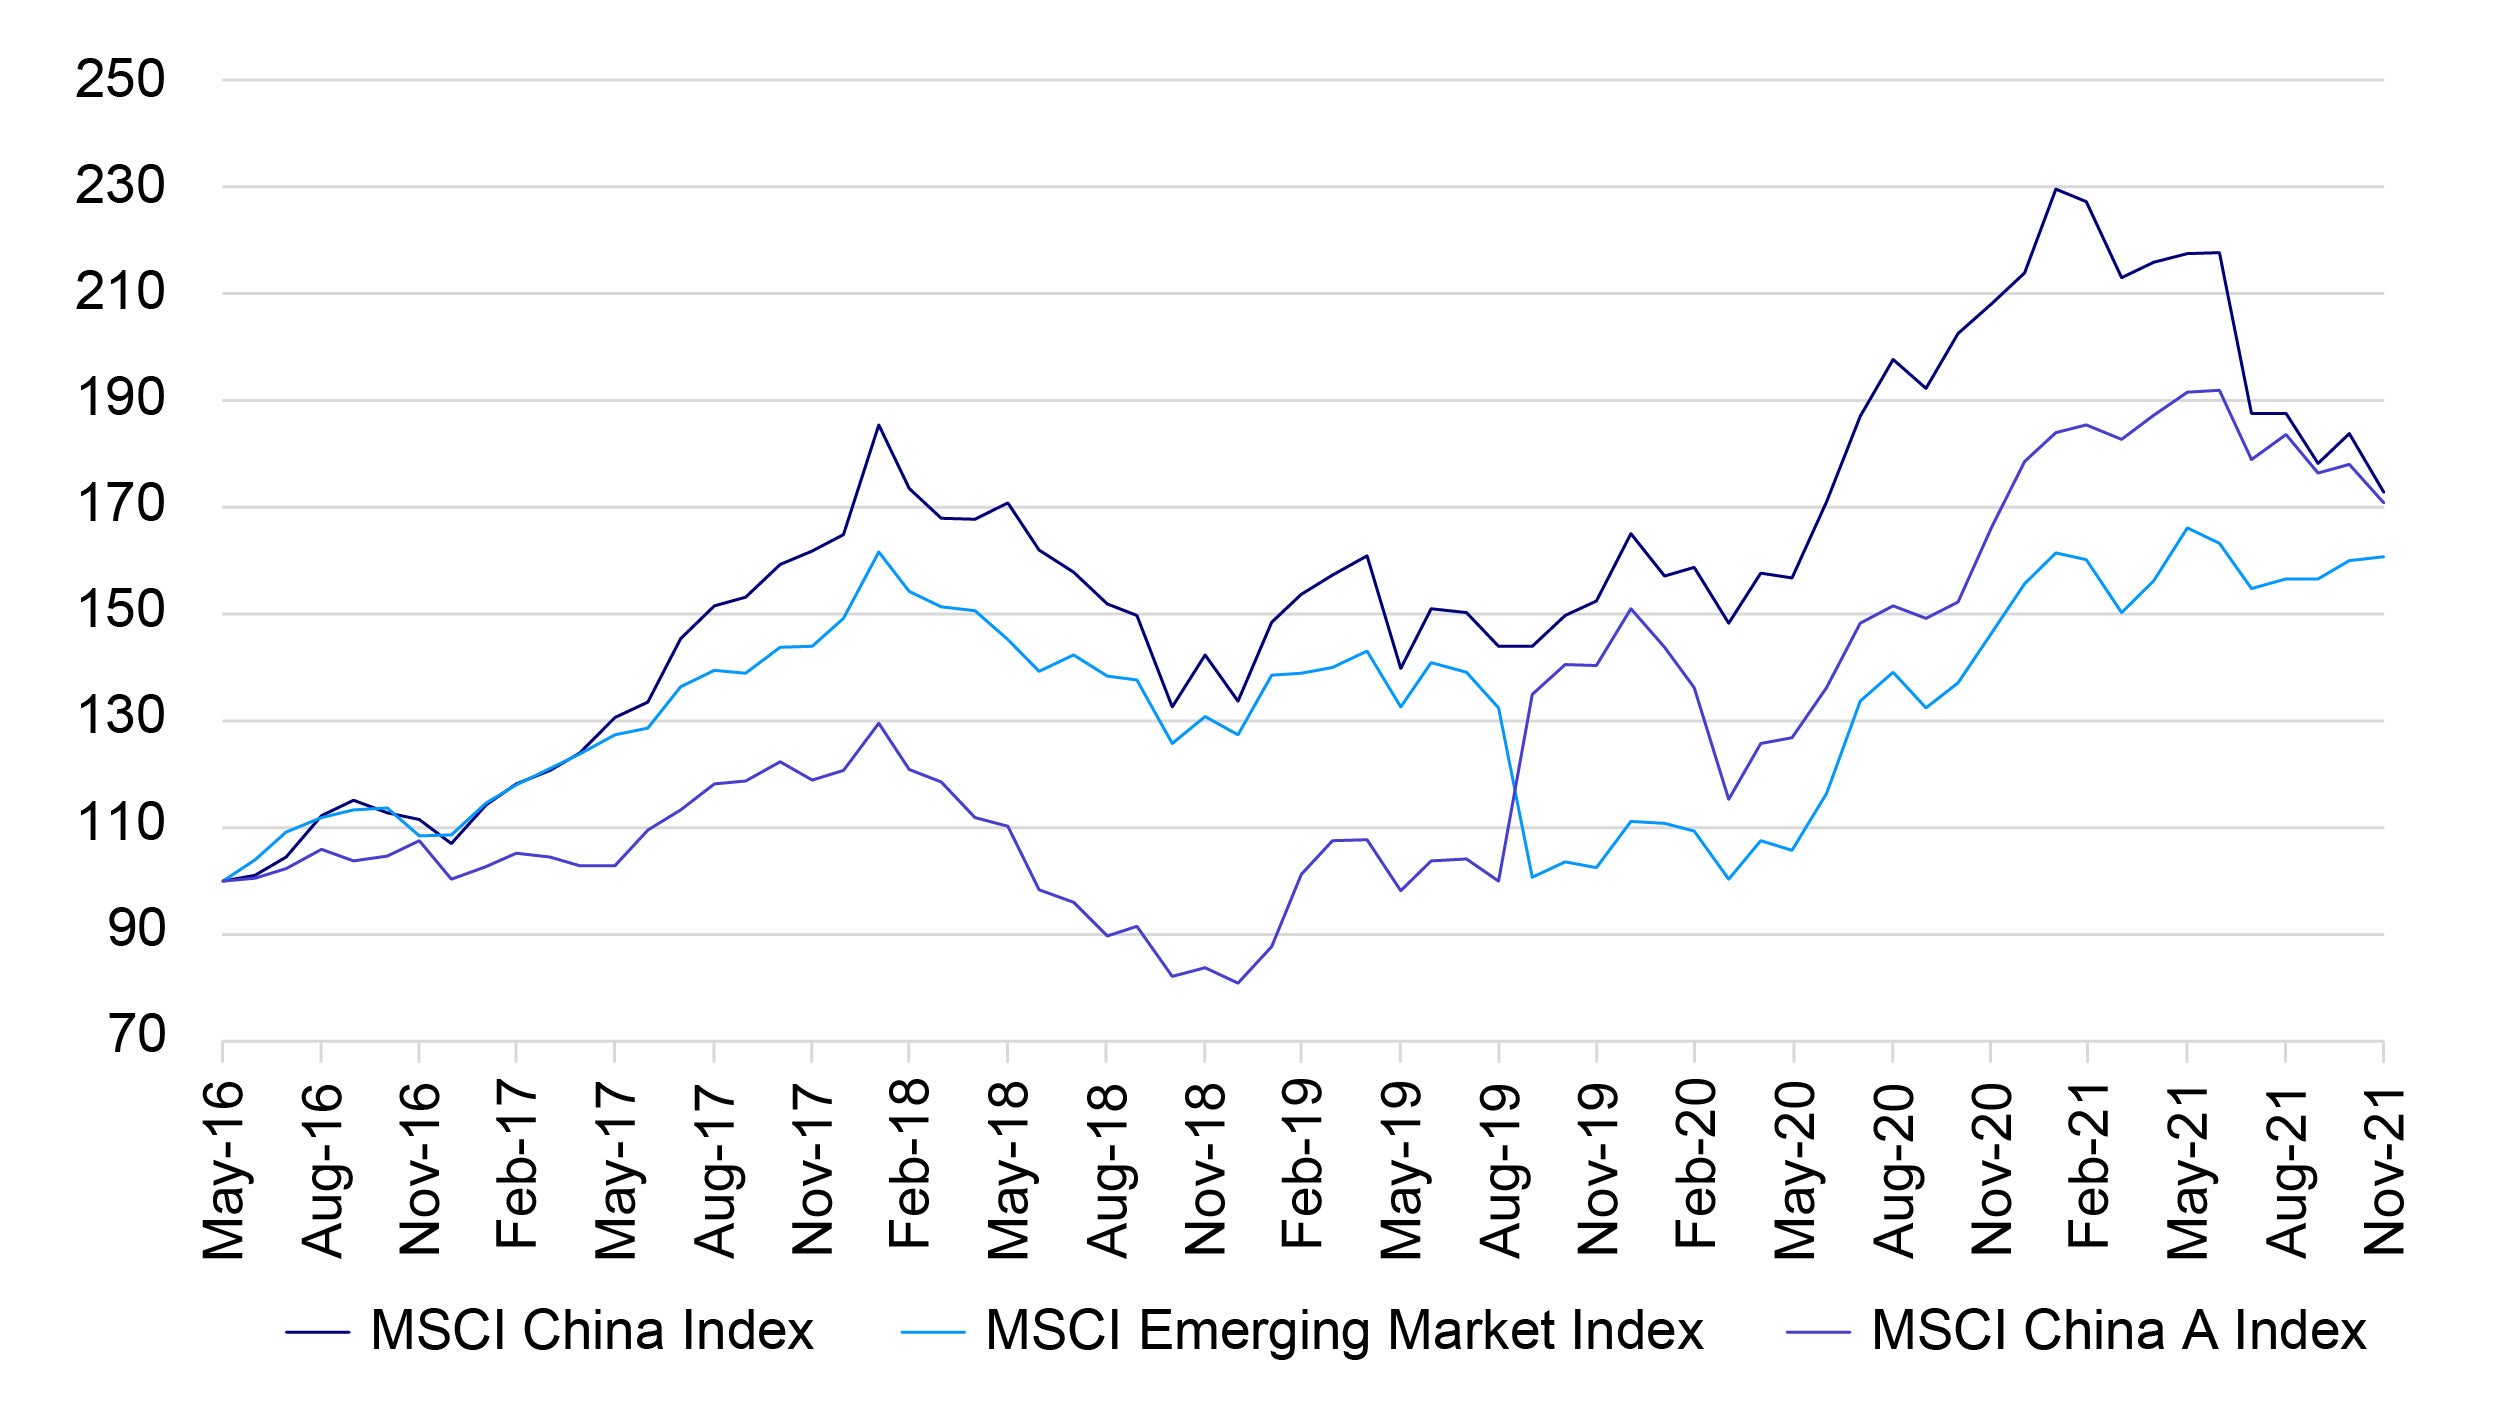 Figure 2: Strong outperformance of MSCI China Index